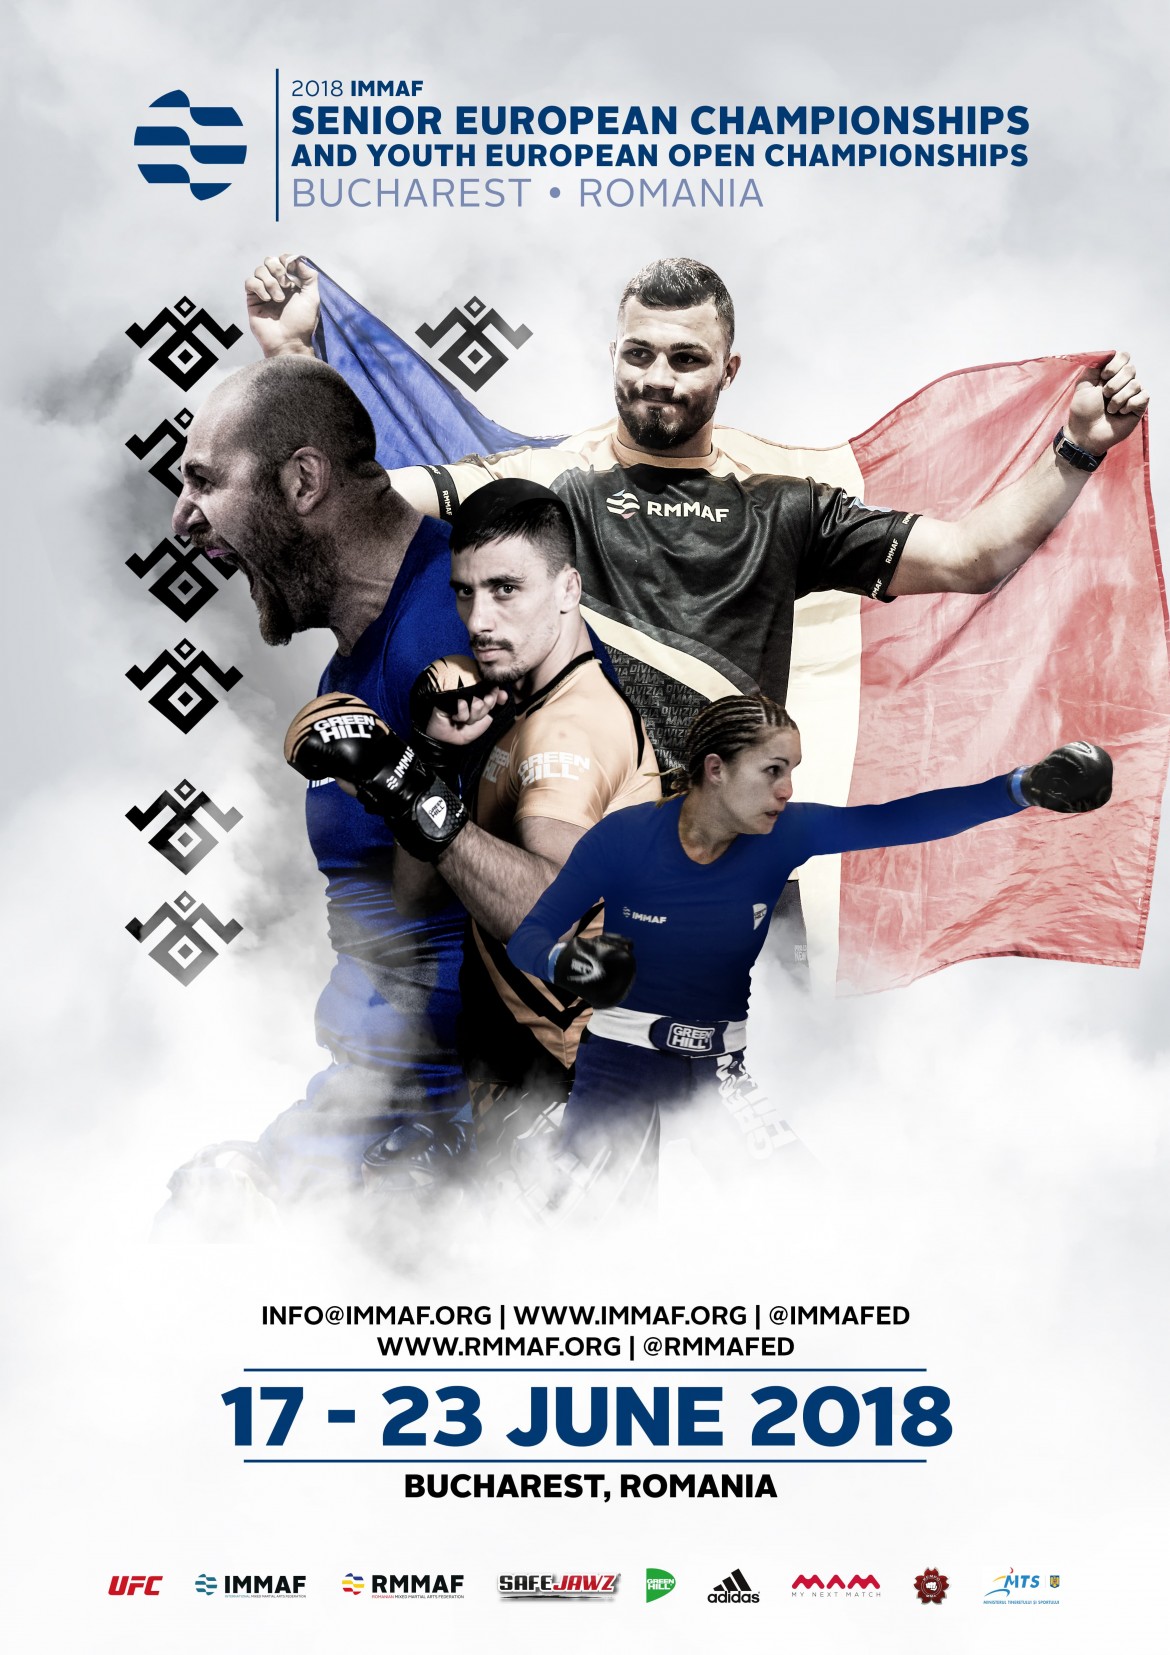 IMMAF BRINGS TWO CHAMPIONSHIPS TO BUCHAREST: